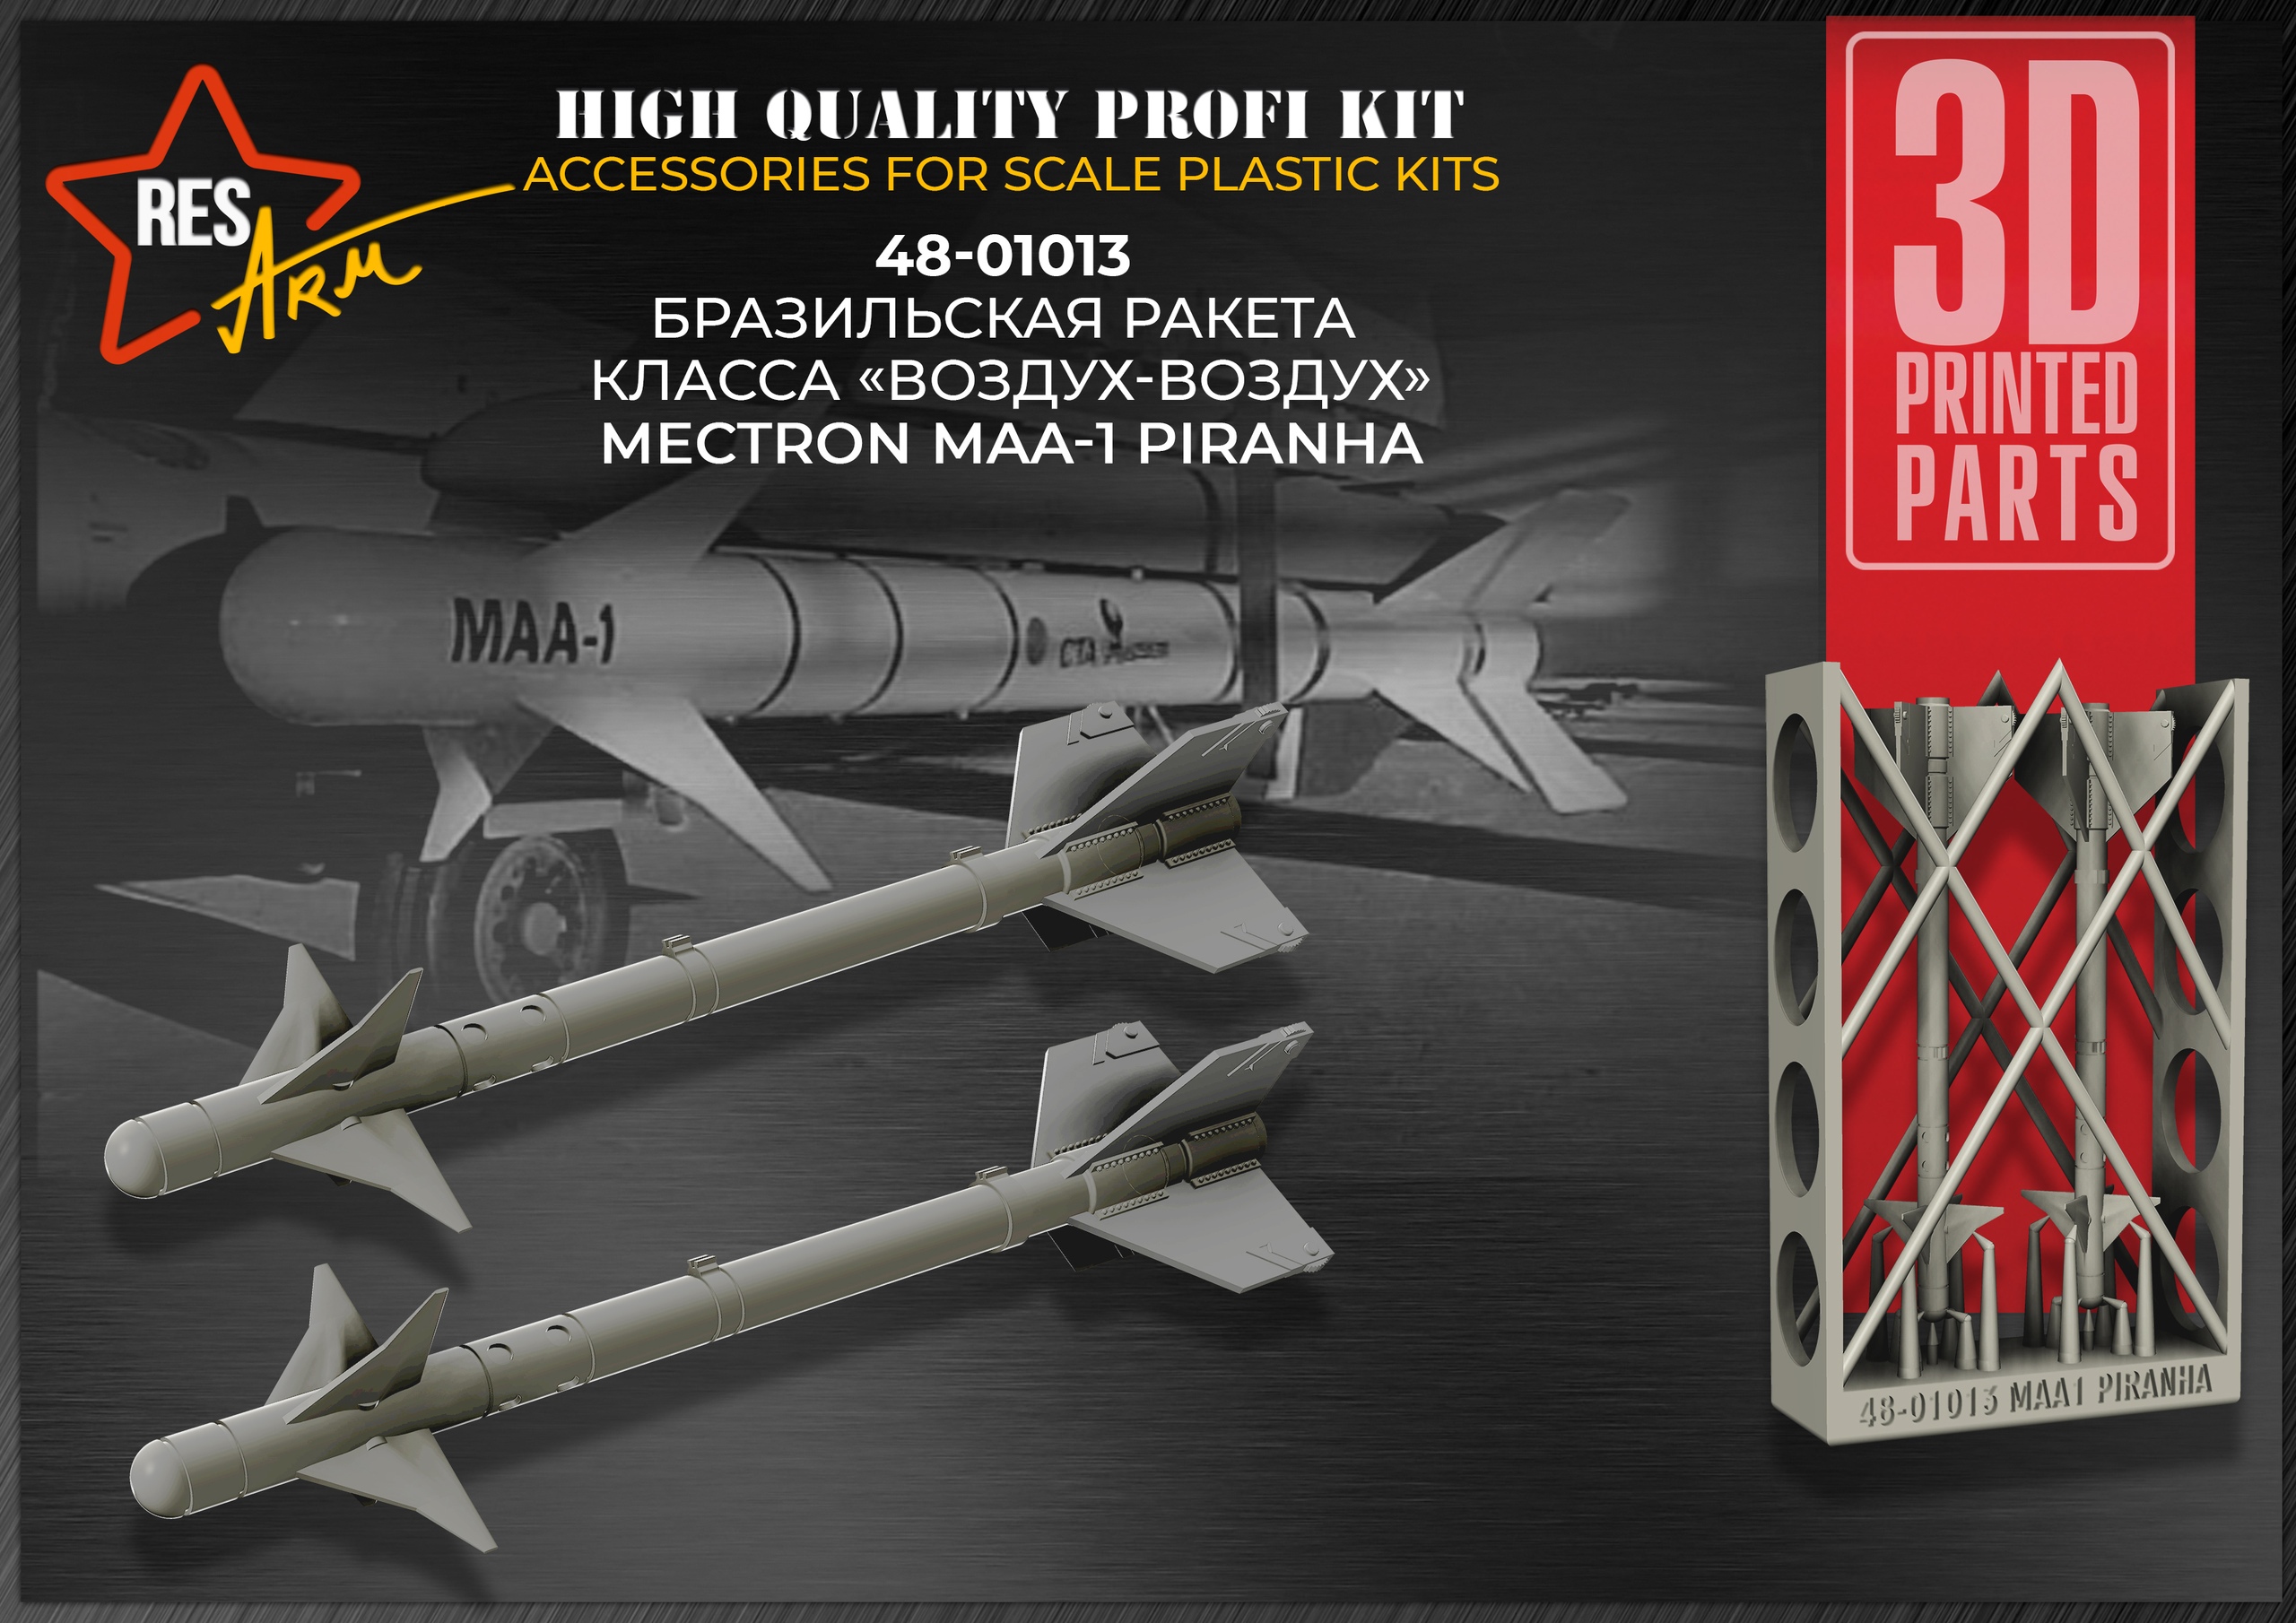 Additions (3D resin printing) 1/48 Brazilian Mectron MAA-1 Piranha air-to-air missile (RESArm)